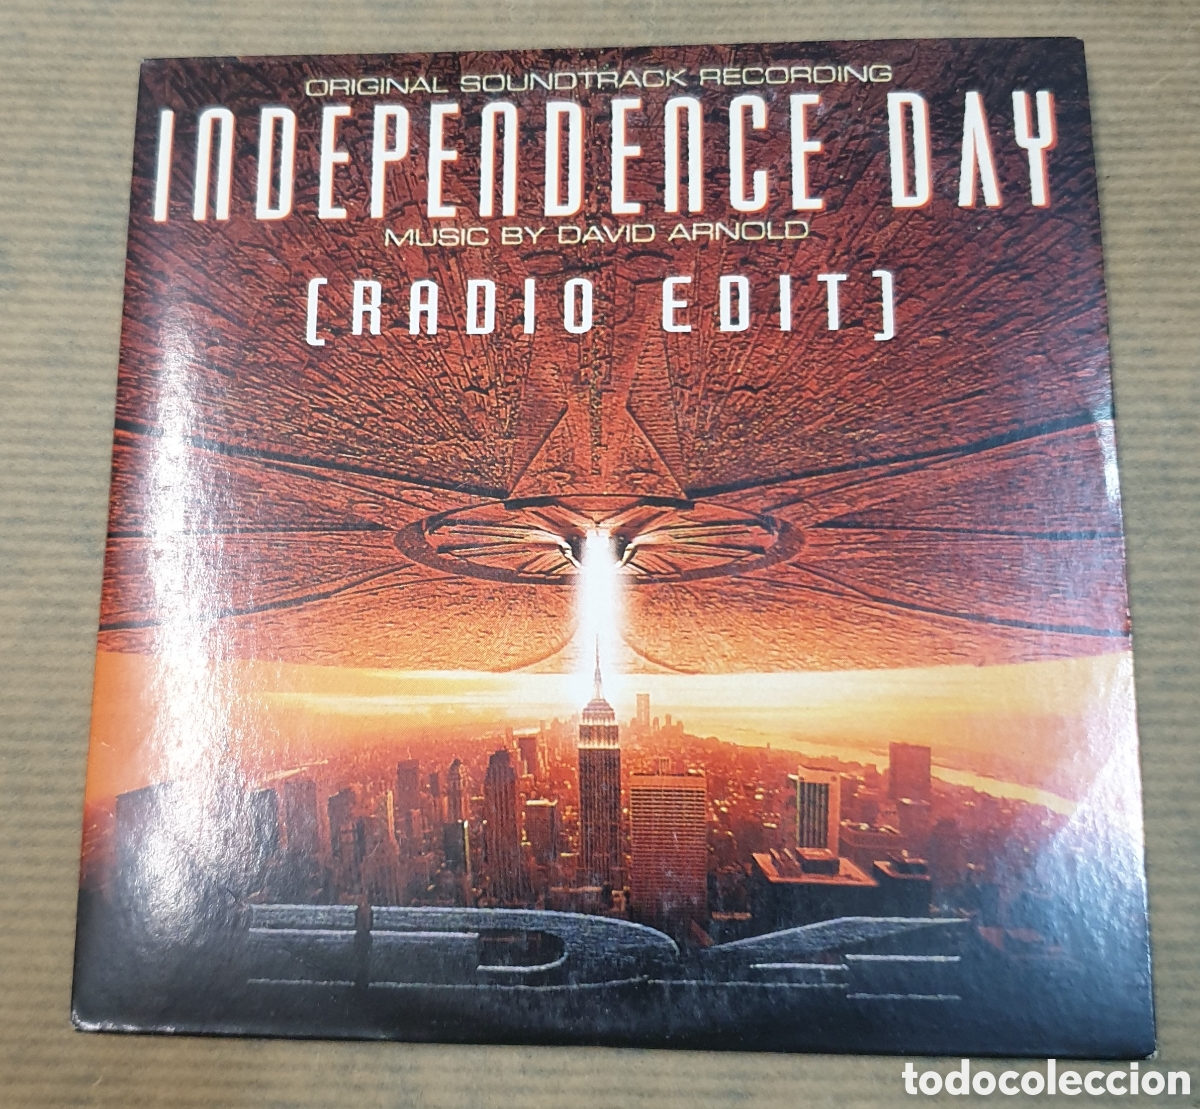 david arnold. independence day bso. cd single - Buy CD's of Soundtracks on  todocoleccion